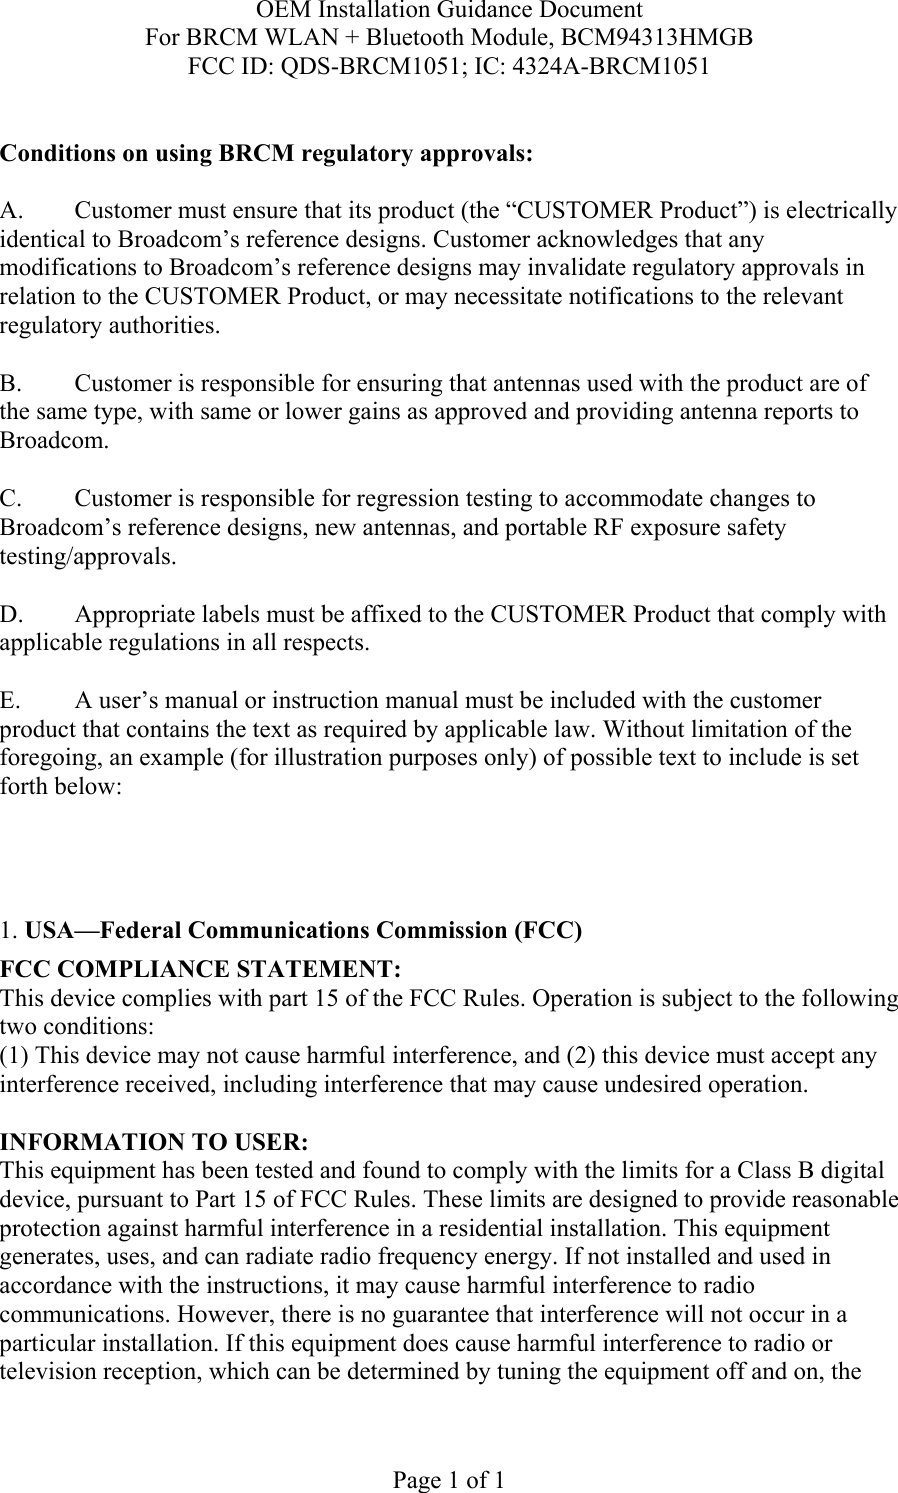 OEM Installation Guidance Document For BRCM WLAN + Bluetooth Module, BCM94313HMGB FCC ID: QDS-BRCM1051; IC: 4324A-BRCM1051  Page 1 of 1  Conditions on using BRCM regulatory approvals:   A.  Customer must ensure that its product (the “CUSTOMER Product”) is electrically identical to Broadcom’s reference designs. Customer acknowledges that any modifications to Broadcom’s reference designs may invalidate regulatory approvals in relation to the CUSTOMER Product, or may necessitate notifications to the relevant regulatory authorities.  B.   Customer is responsible for ensuring that antennas used with the product are of the same type, with same or lower gains as approved and providing antenna reports to Broadcom.  C.   Customer is responsible for regression testing to accommodate changes to Broadcom’s reference designs, new antennas, and portable RF exposure safety testing/approvals.  D.  Appropriate labels must be affixed to the CUSTOMER Product that comply with applicable regulations in all respects.    E.  A user’s manual or instruction manual must be included with the customer product that contains the text as required by applicable law. Without limitation of the foregoing, an example (for illustration purposes only) of possible text to include is set forth below:      1. USA—Federal Communications Commission (FCC) FCC COMPLIANCE STATEMENT: This device complies with part 15 of the FCC Rules. Operation is subject to the following two conditions: (1) This device may not cause harmful interference, and (2) this device must accept any interference received, including interference that may cause undesired operation.  INFORMATION TO USER: This equipment has been tested and found to comply with the limits for a Class B digital device, pursuant to Part 15 of FCC Rules. These limits are designed to provide reasonable protection against harmful interference in a residential installation. This equipment generates, uses, and can radiate radio frequency energy. If not installed and used in accordance with the instructions, it may cause harmful interference to radio communications. However, there is no guarantee that interference will not occur in a particular installation. If this equipment does cause harmful interference to radio or television reception, which can be determined by tuning the equipment off and on, the 